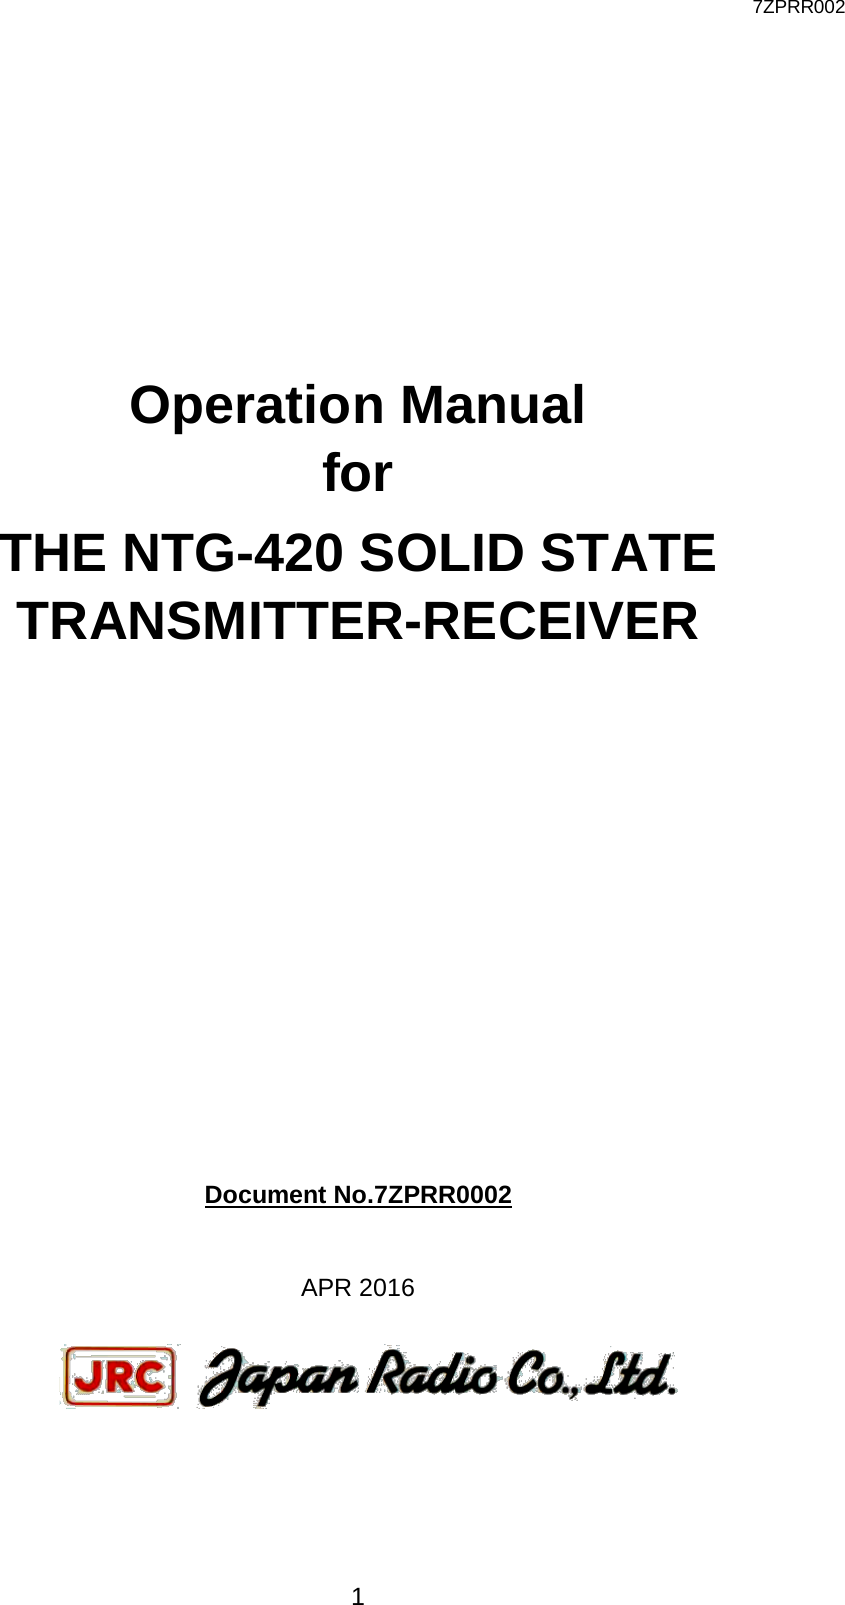  7ZPRR002 1          Operation Manual for THE NTG-420 SOLID STATE TRANSMITTER-RECEIVER            Document No.7ZPRR0002  APR 2016 